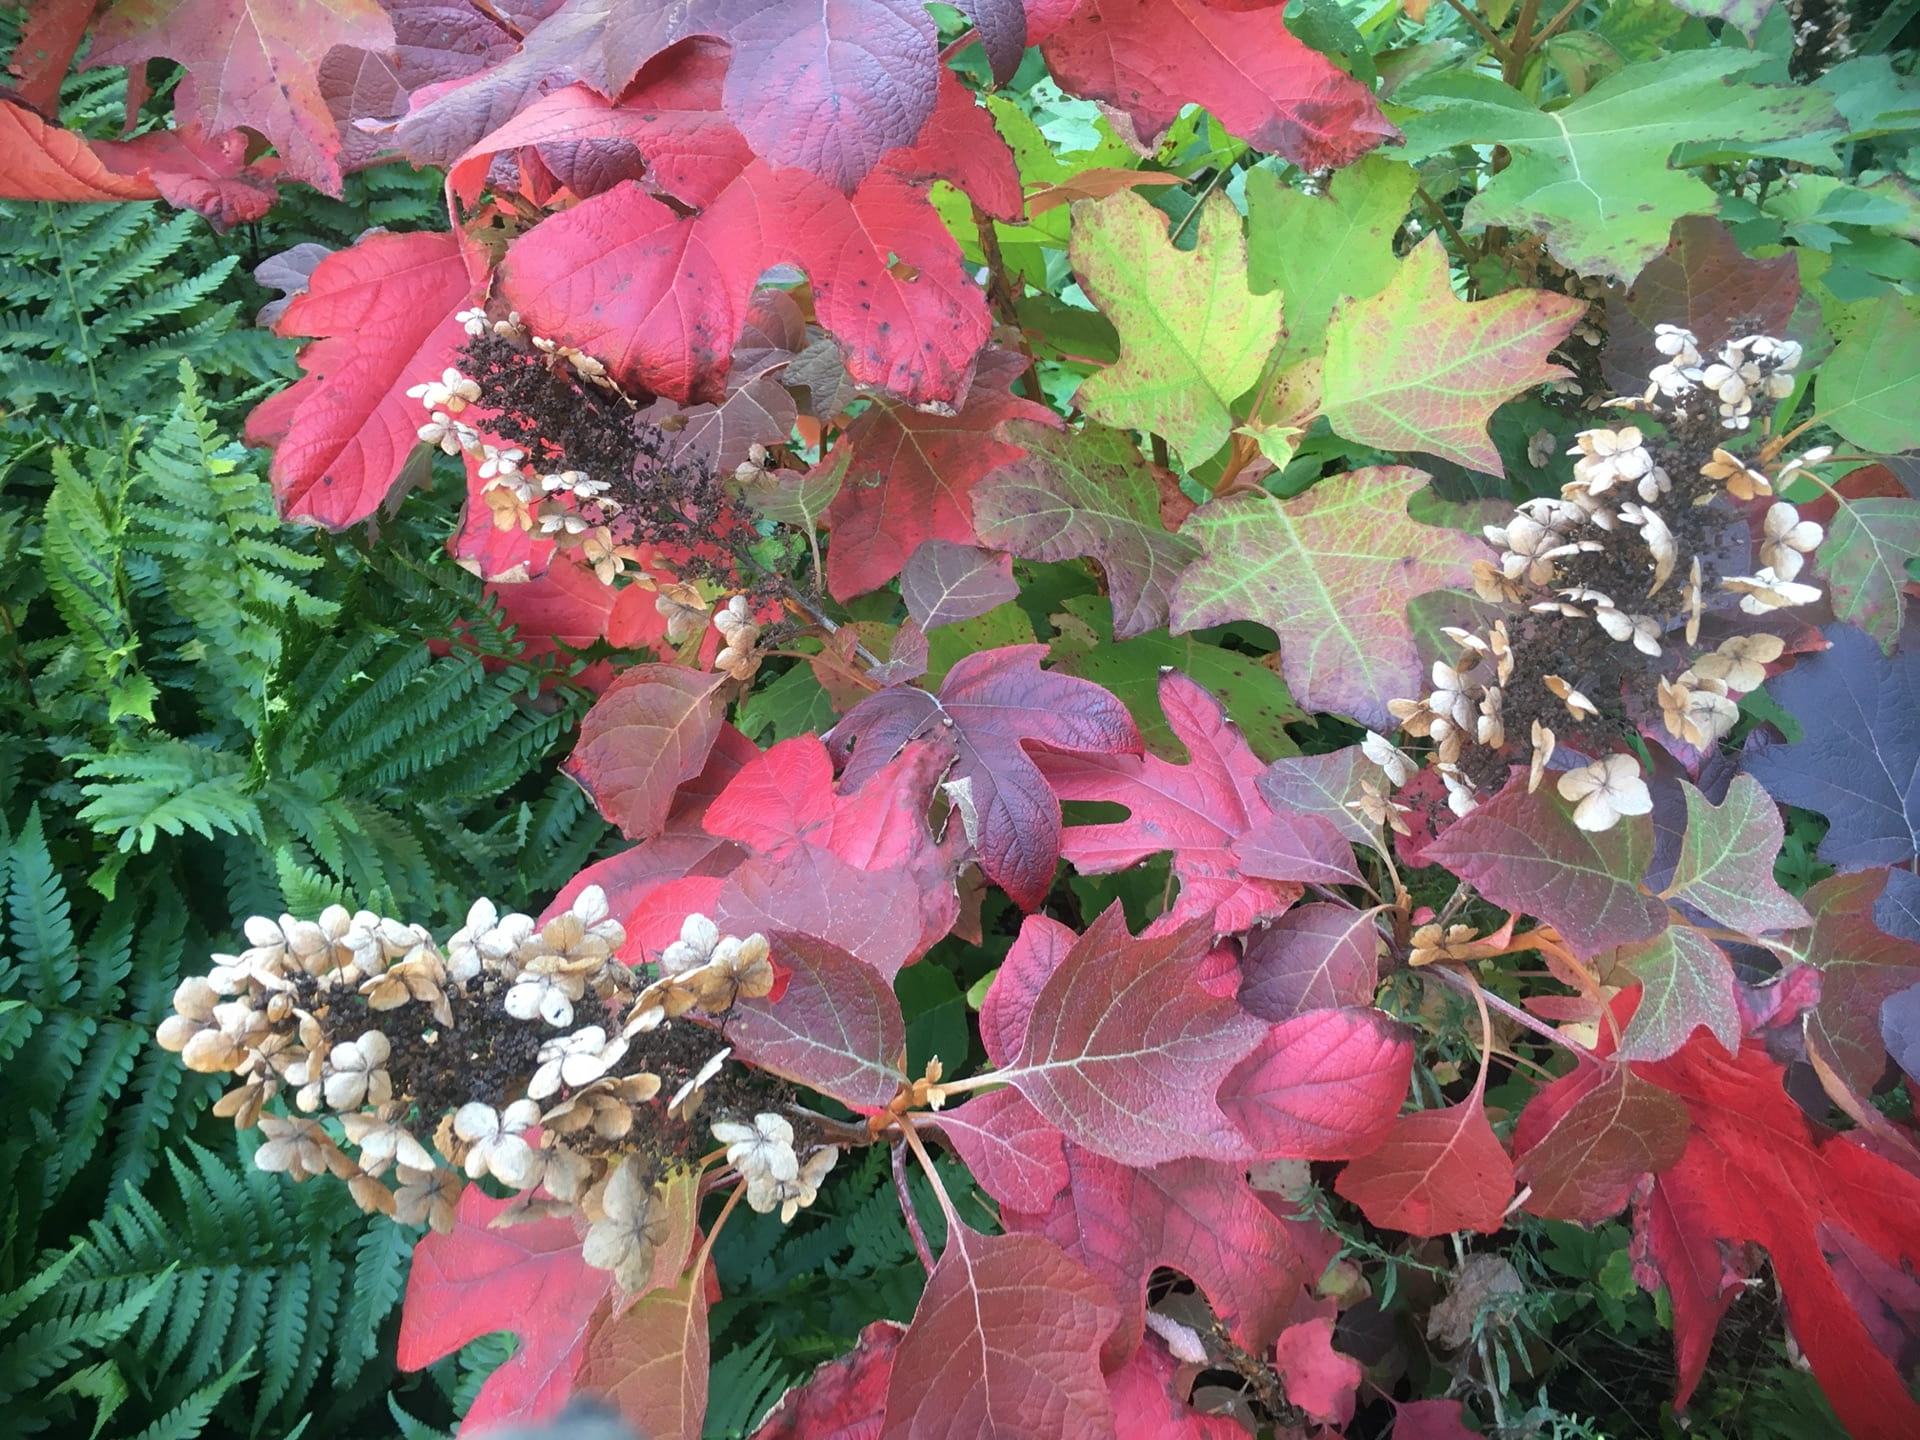 The fall color and long lasting flowers of Hydrangea Quercifolia makes this native shrub an invaluable inhabitant of the park.